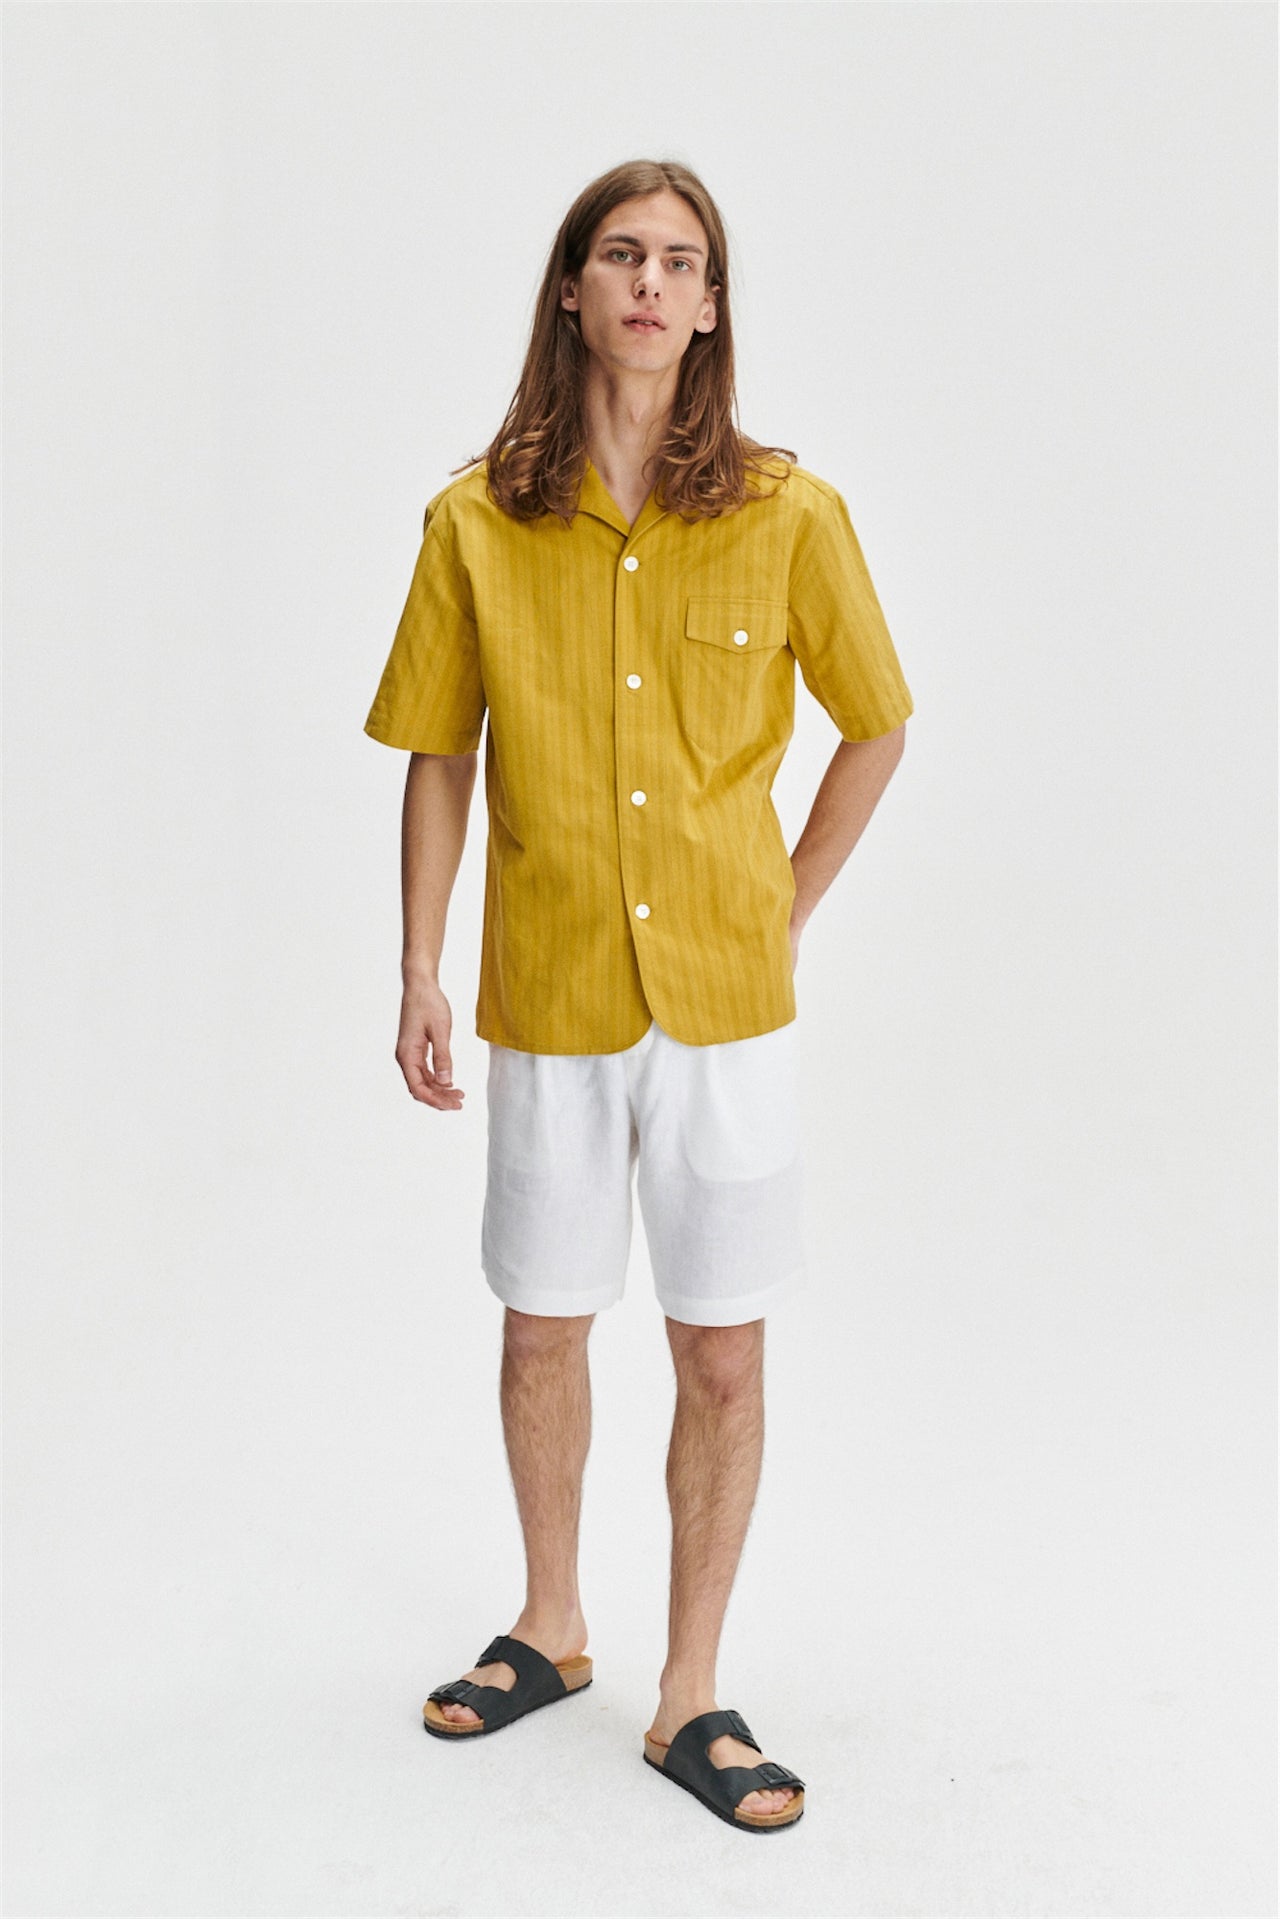 Short Sleeve Relaxed Spread Collar Shirt in a Madras Yellow Jacquard Woven Japanese Cotton